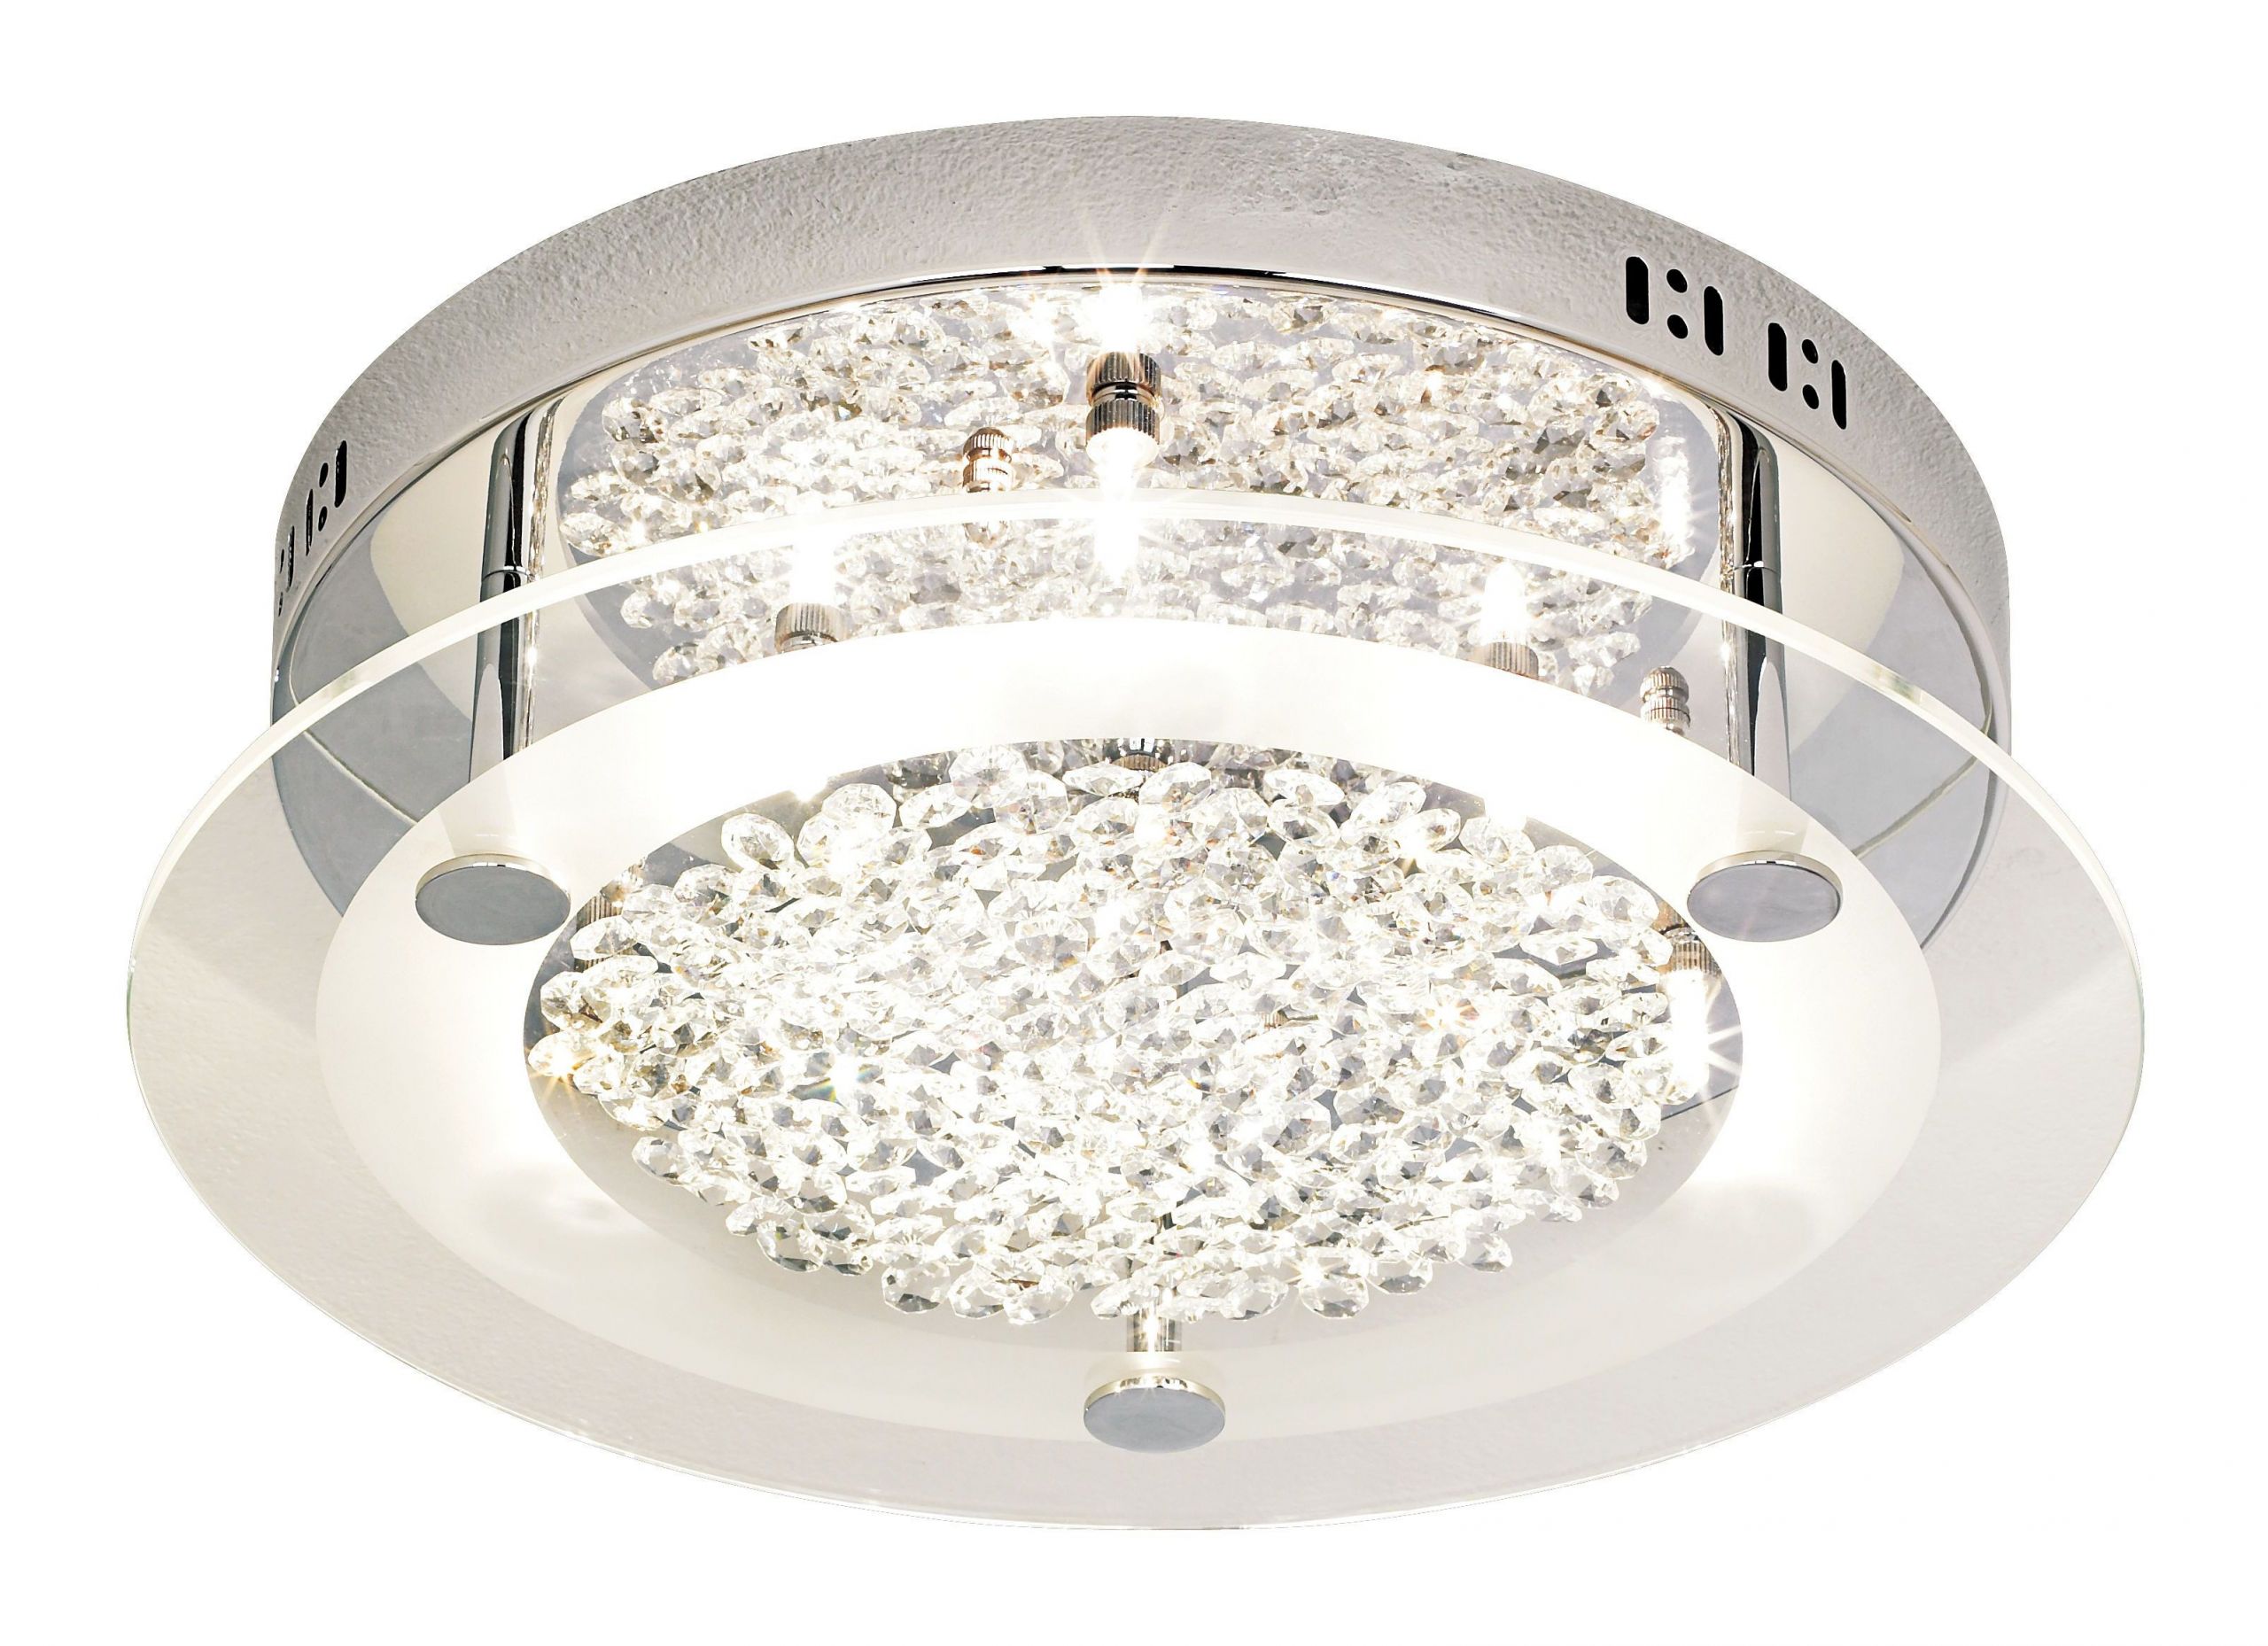 Bathroom Ceiling Light with Fan Inspirational Exhausting How to Choose A Bathroom Fan